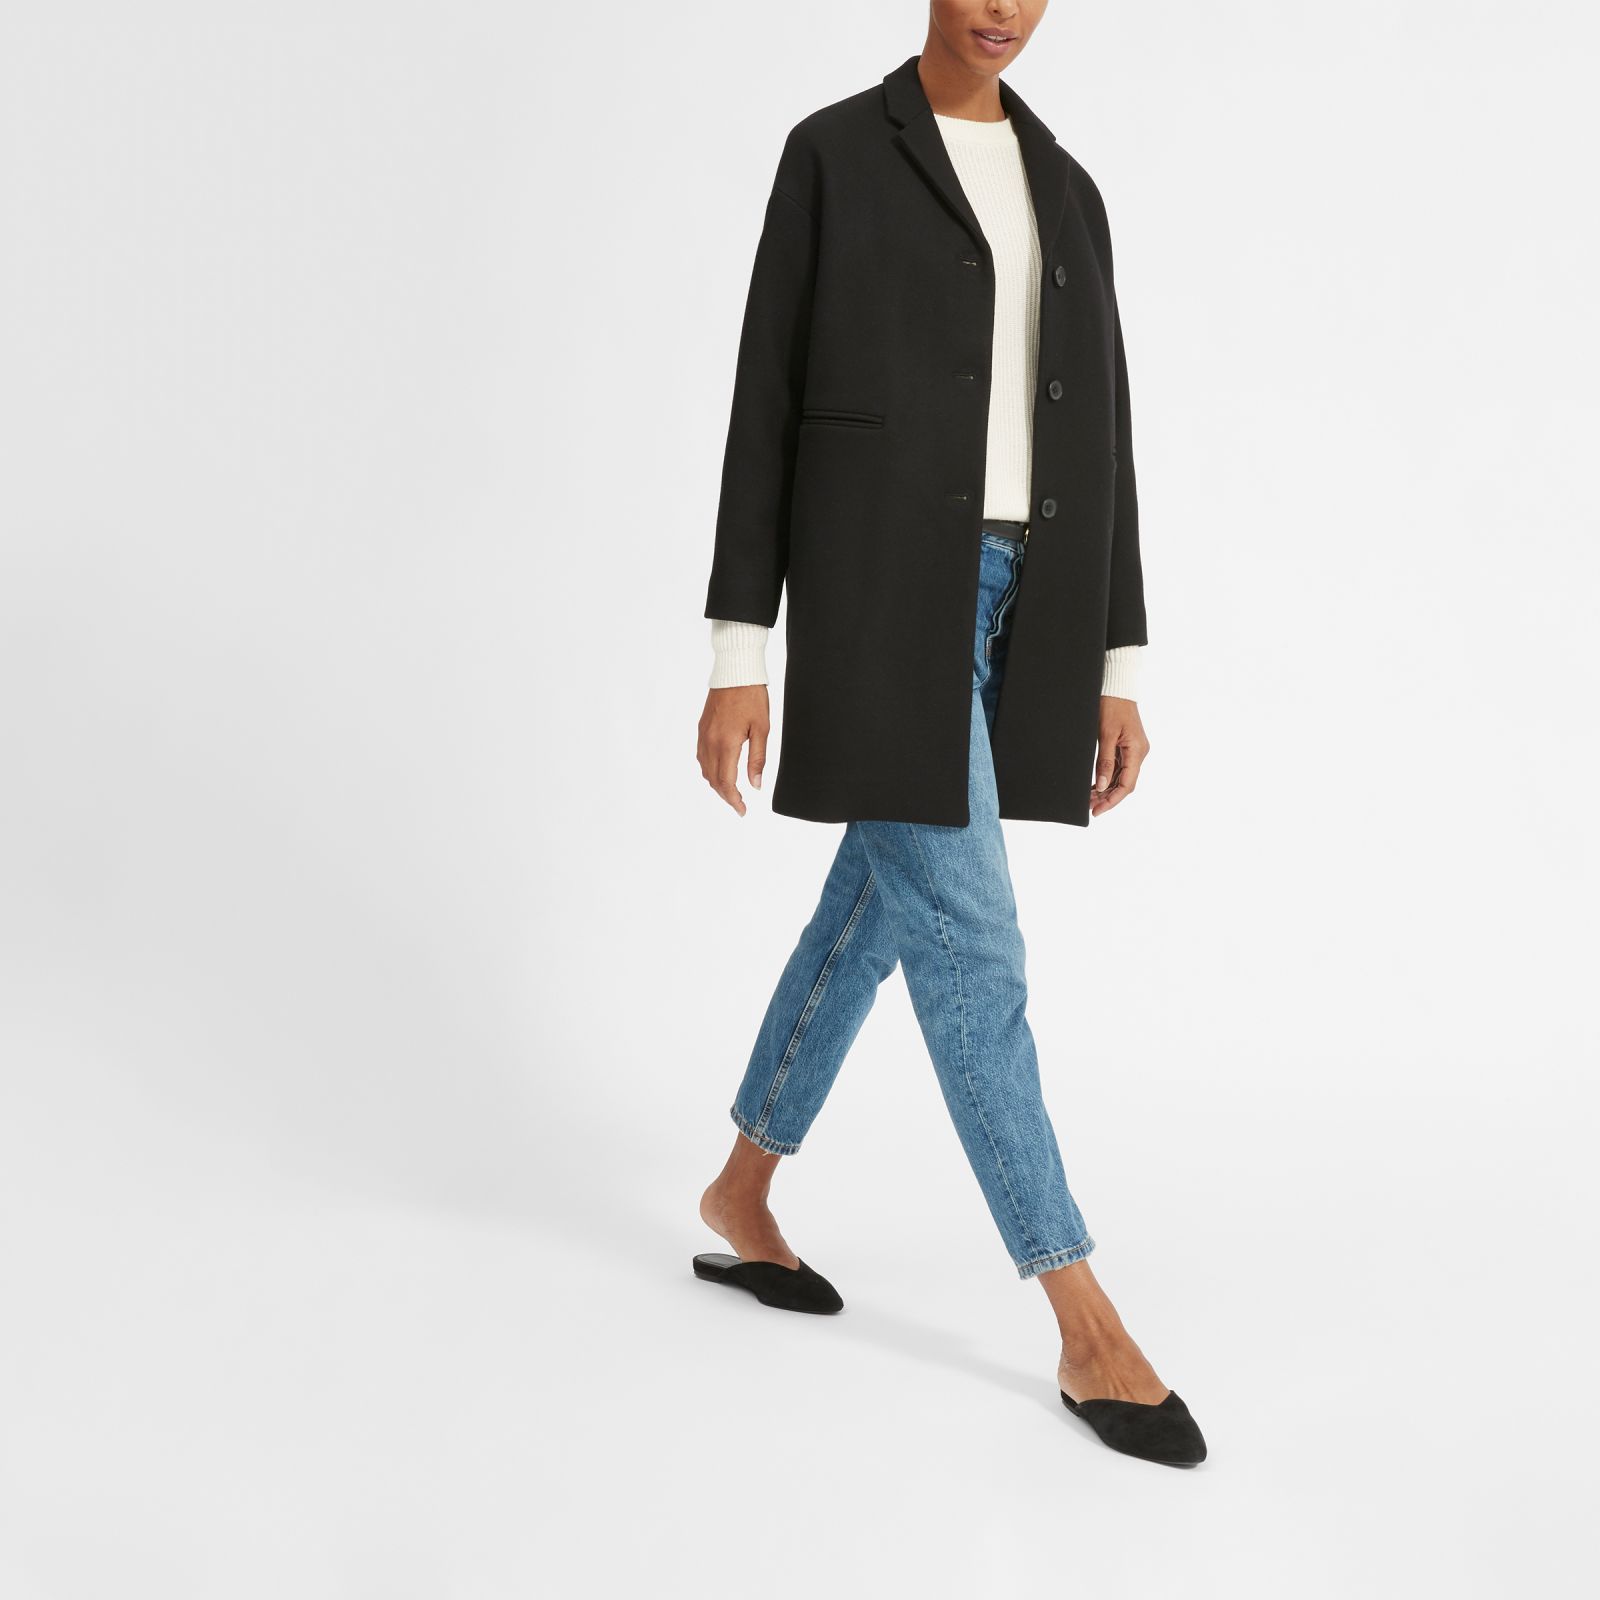 Women's Cocoon Coat by Everlane in Black, Size 00 | Everlane